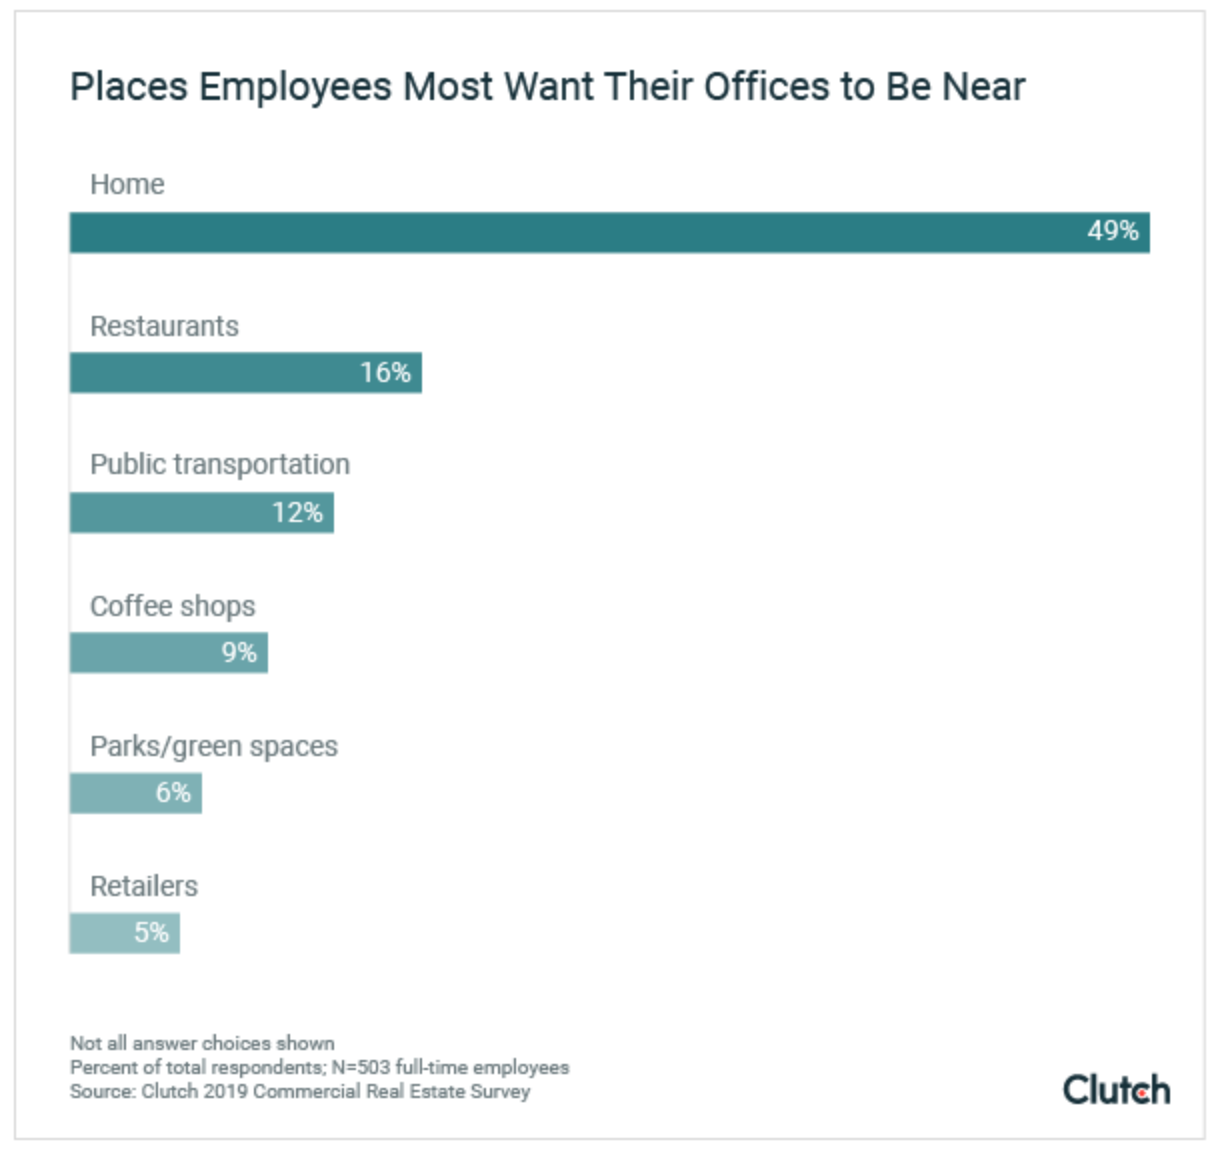 Places employees most want their offices to be near